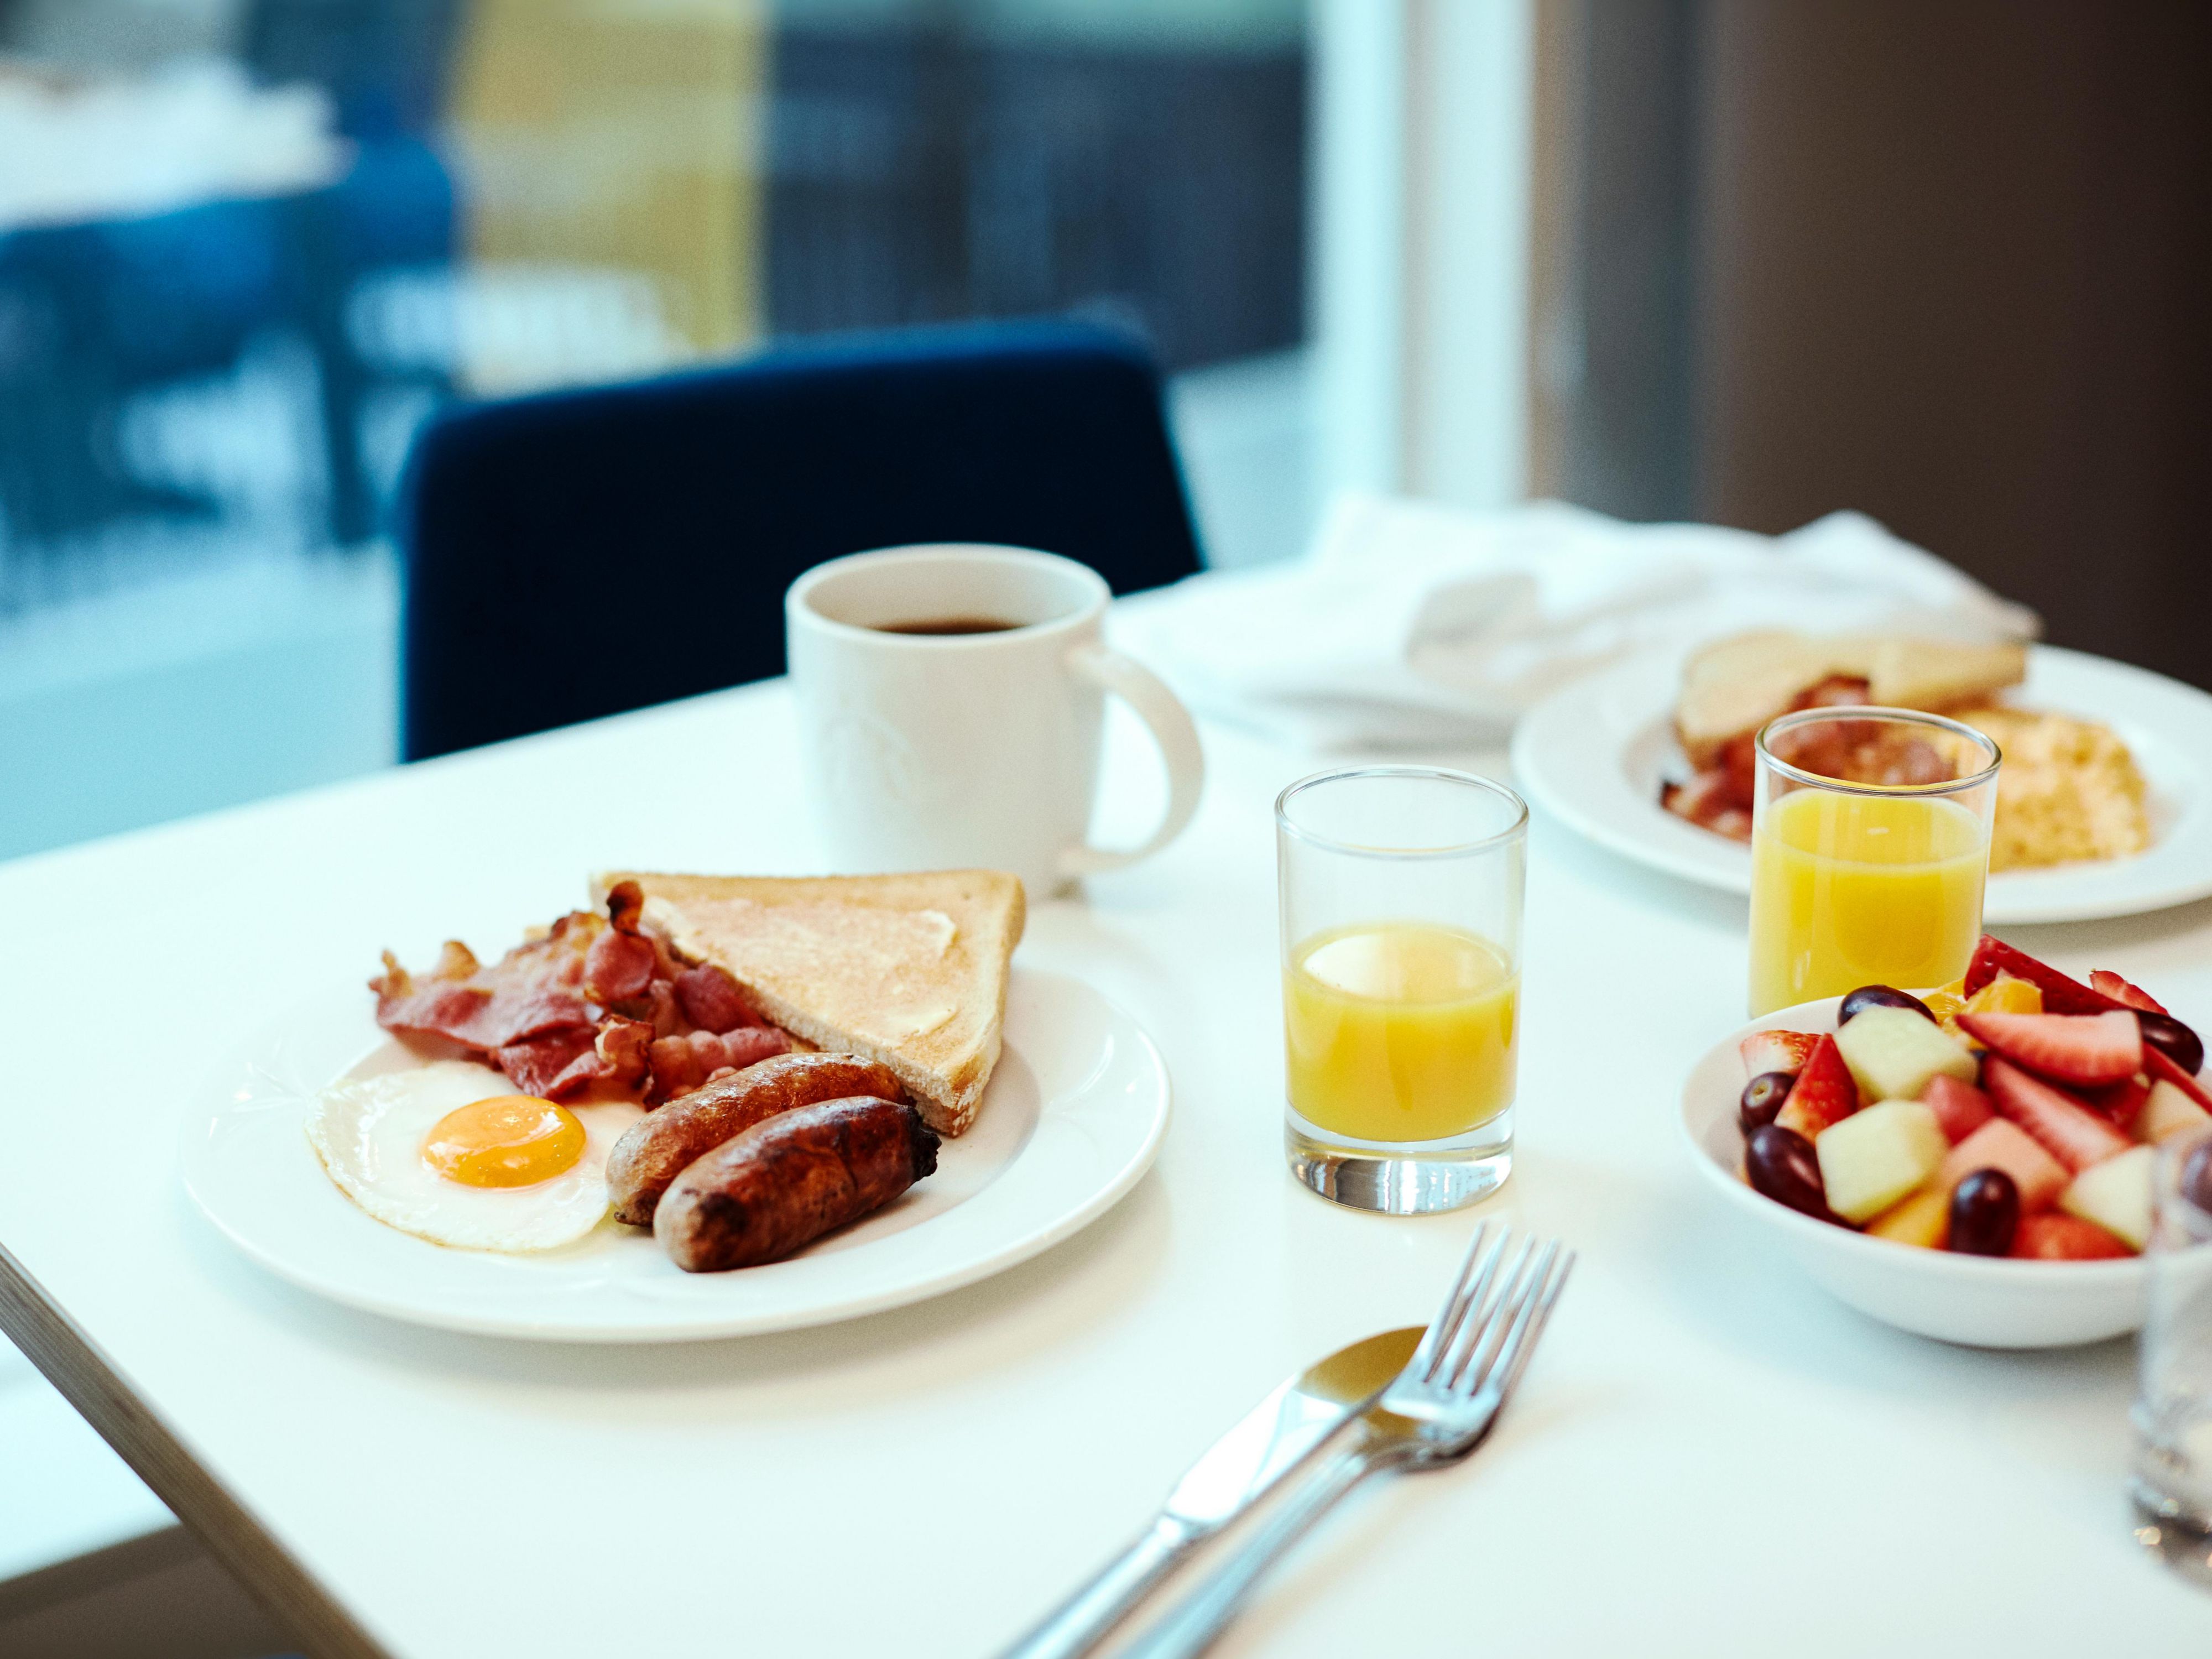 Get Breakfast With Your Stay!